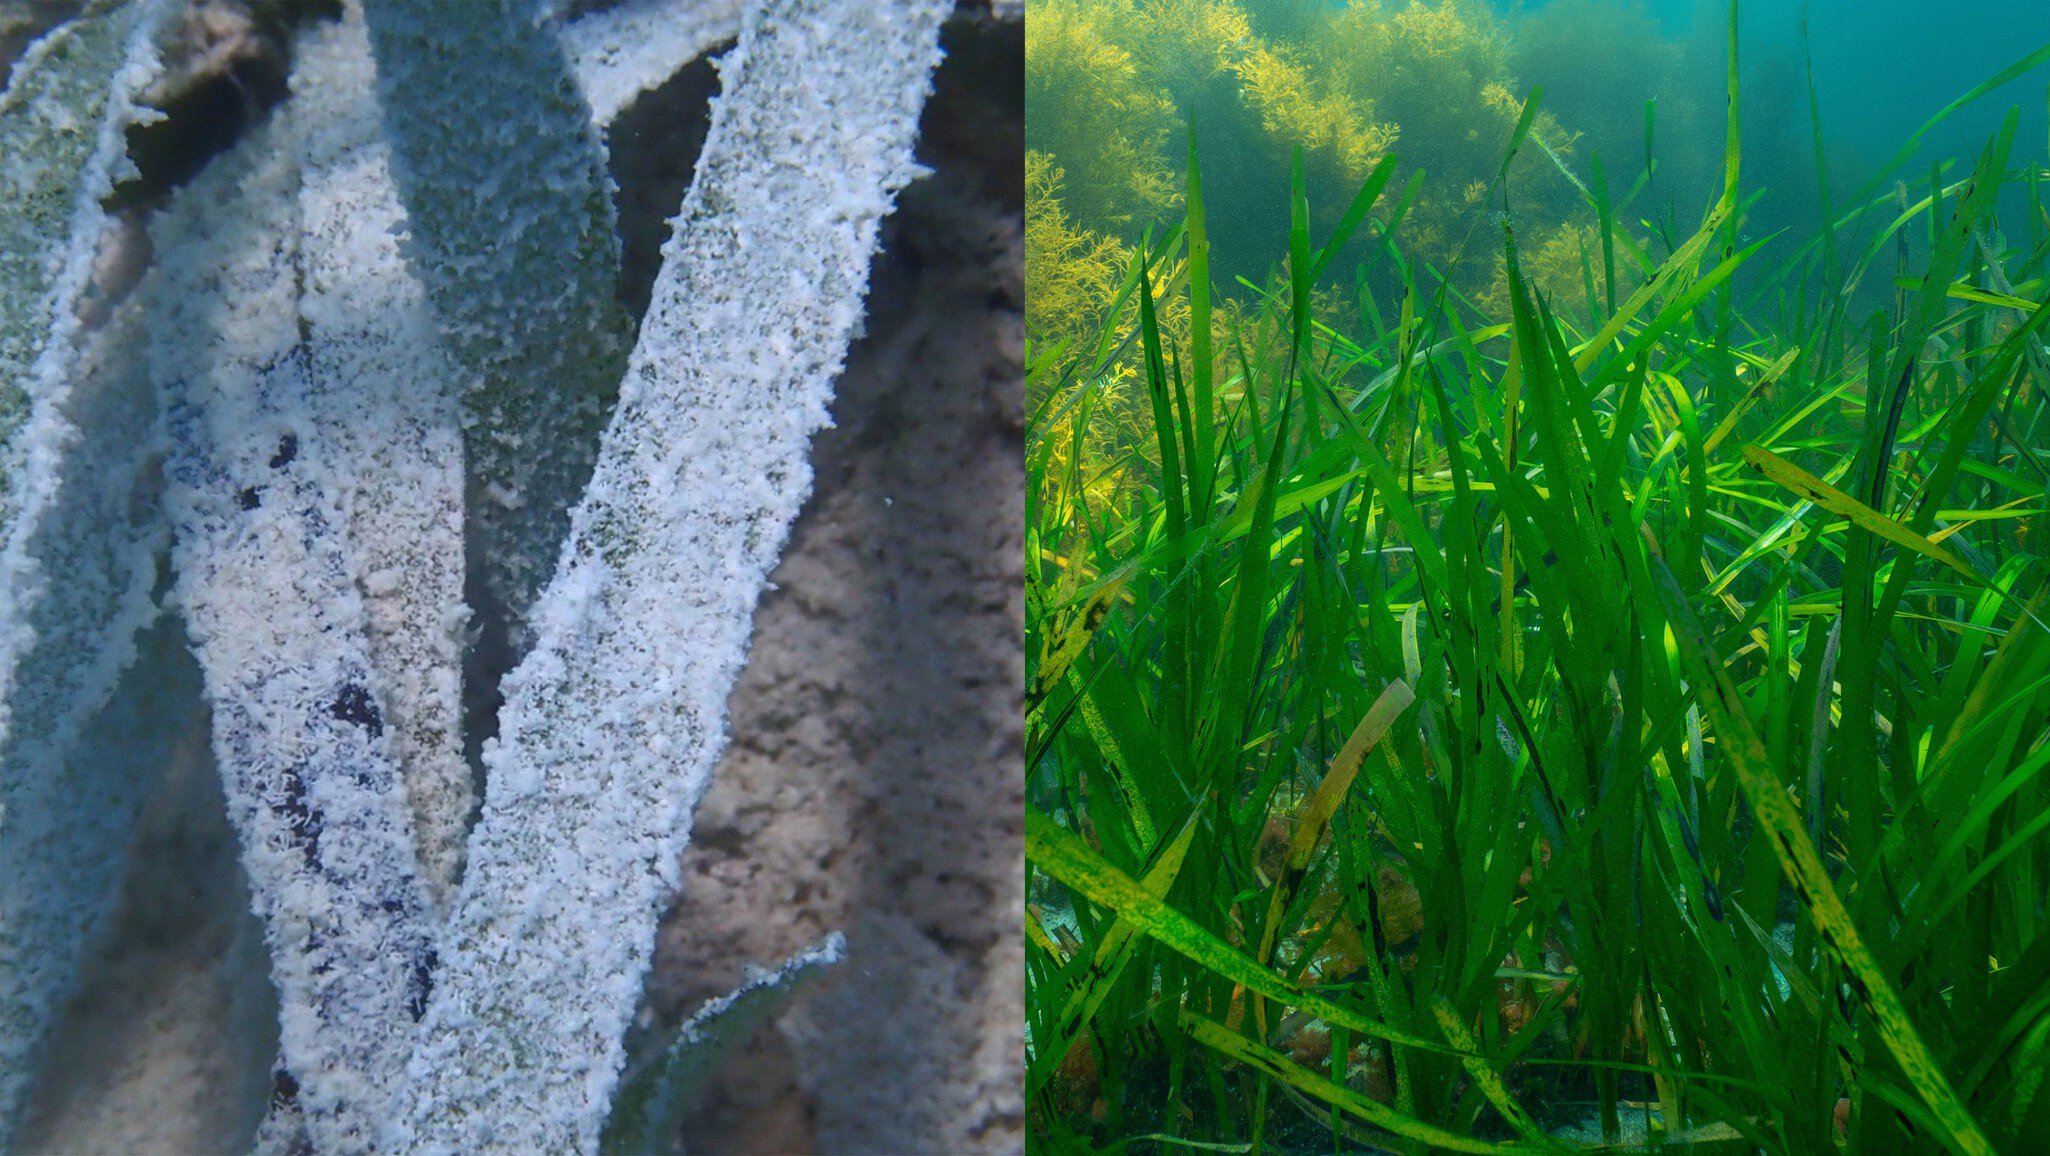 Image showing healthy and unhealthy seagrass. Photo credit: PlanBlue

restricted use - only for use in agreed long read article. For further use, please contact media@planblue.com